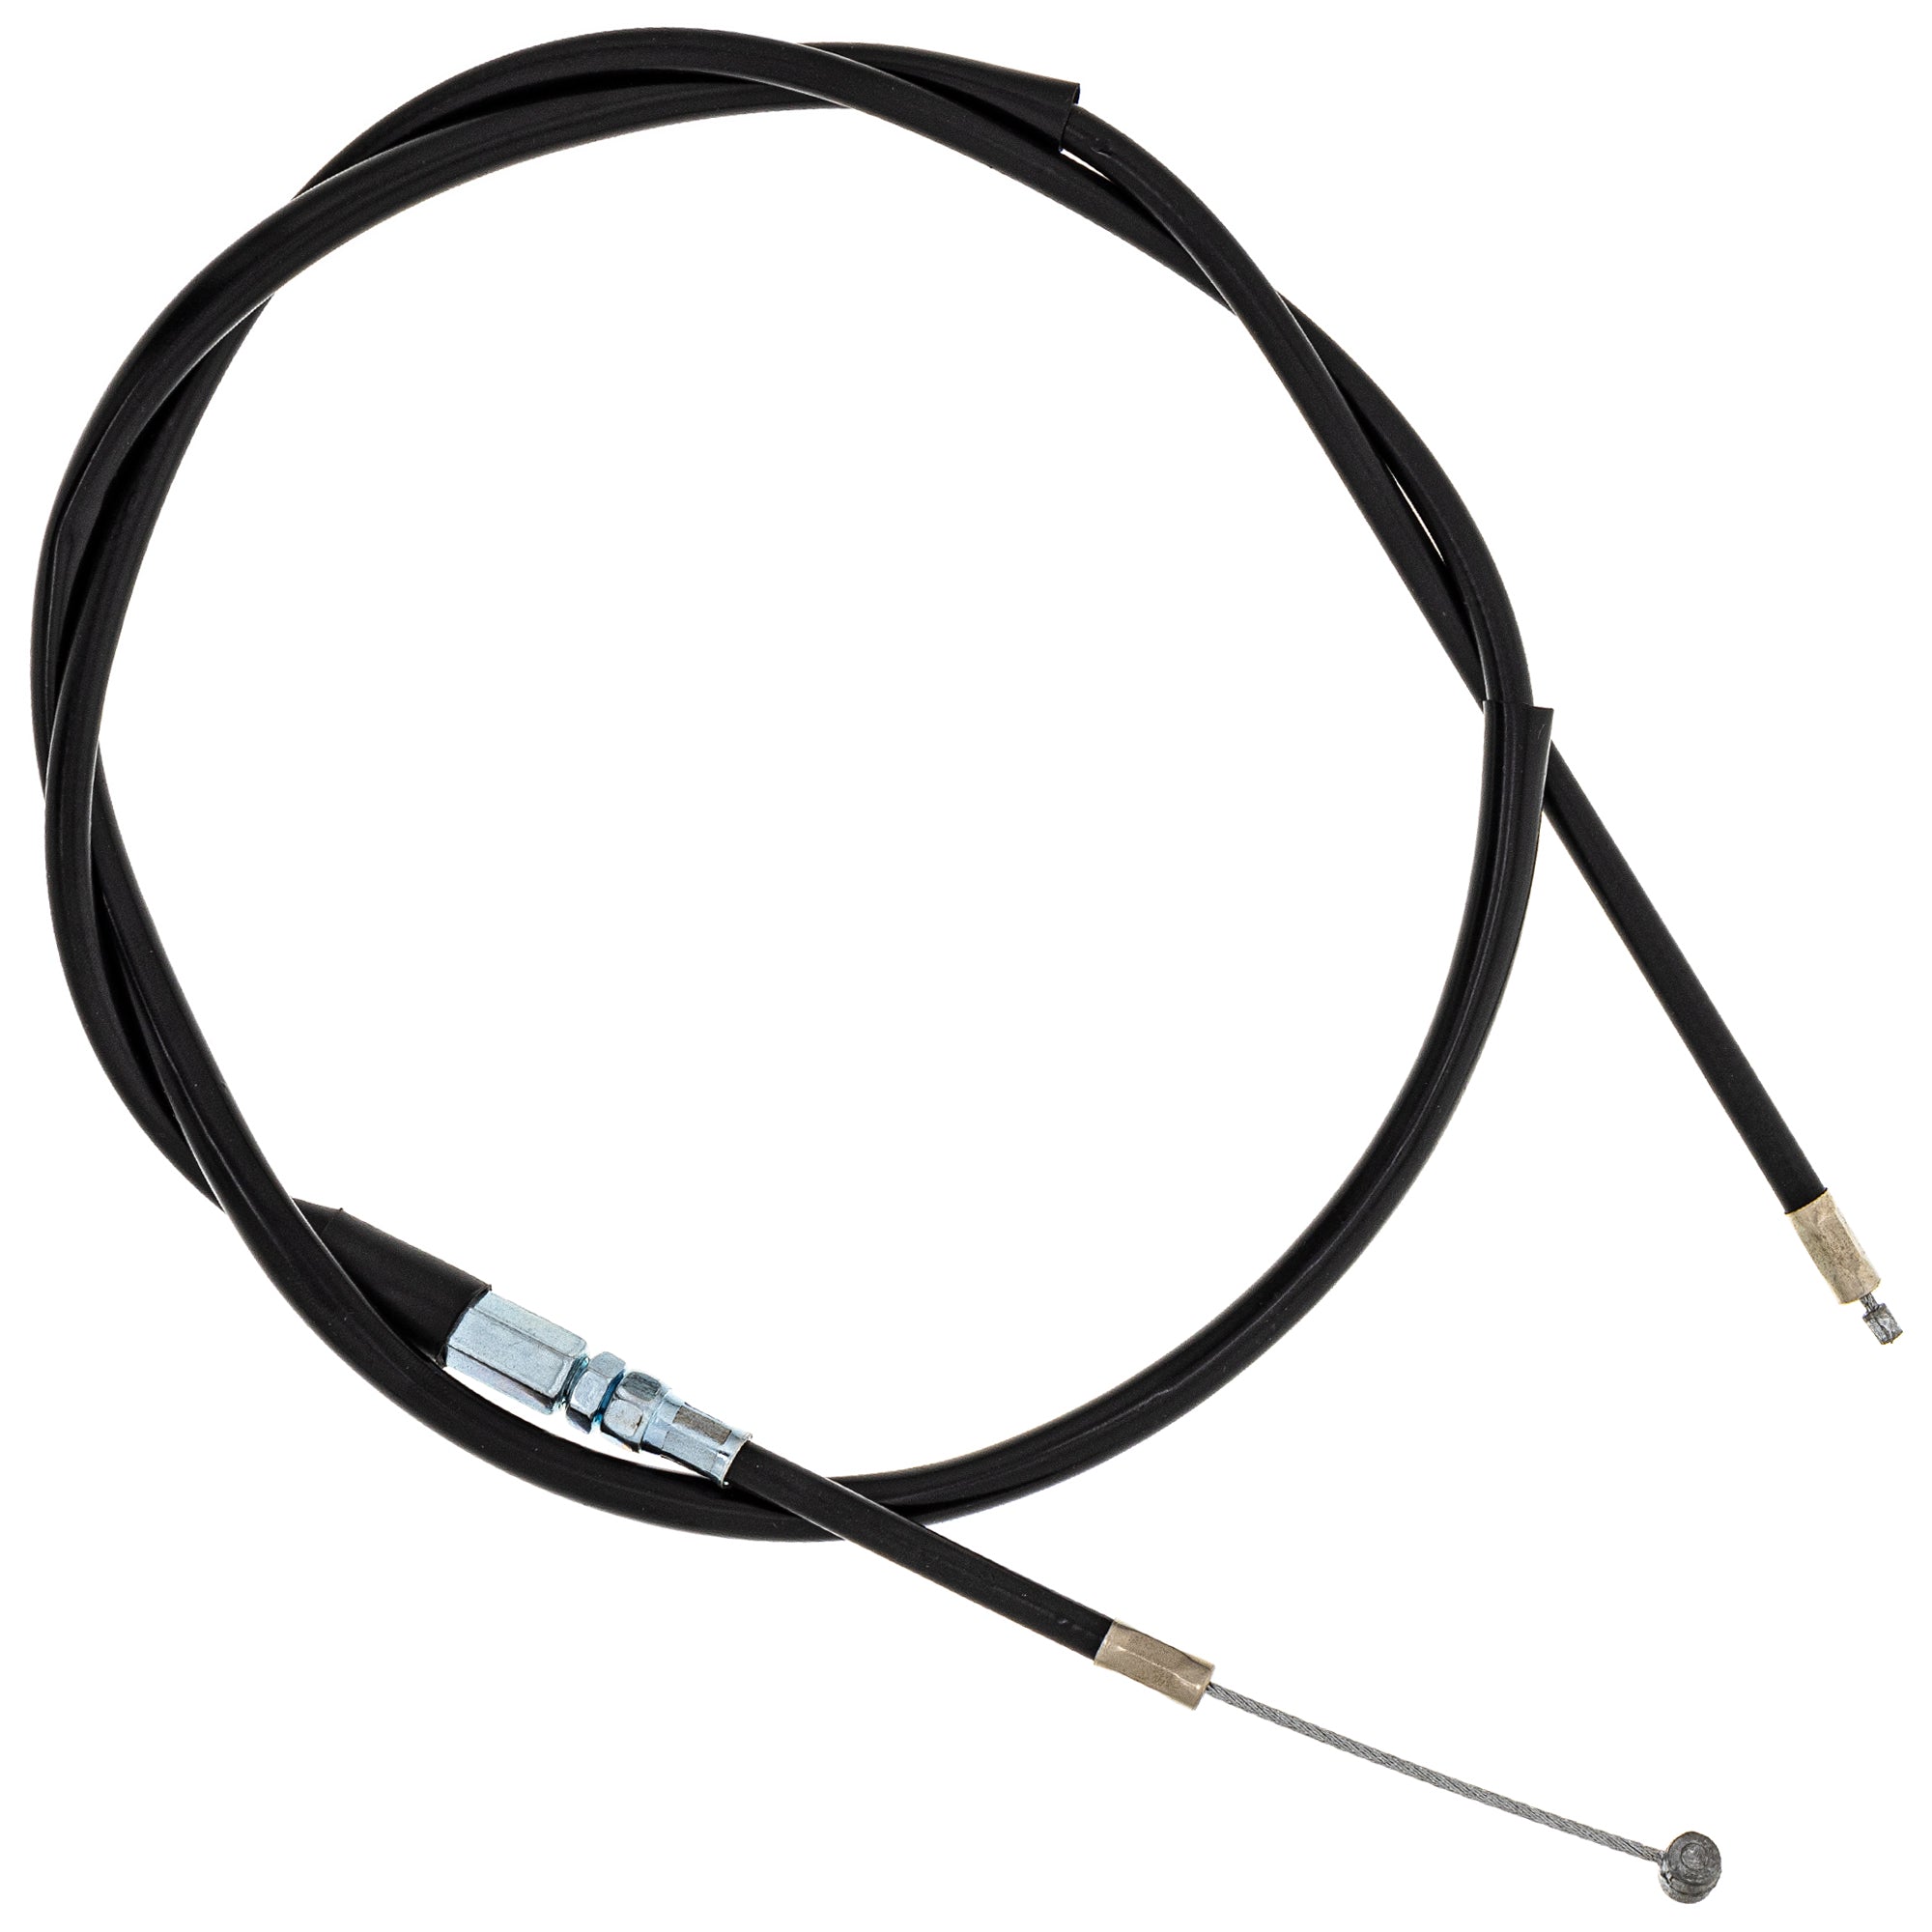 Hot Start Cable for zOTHER RMZ250 NICHE 519-CCB2268L